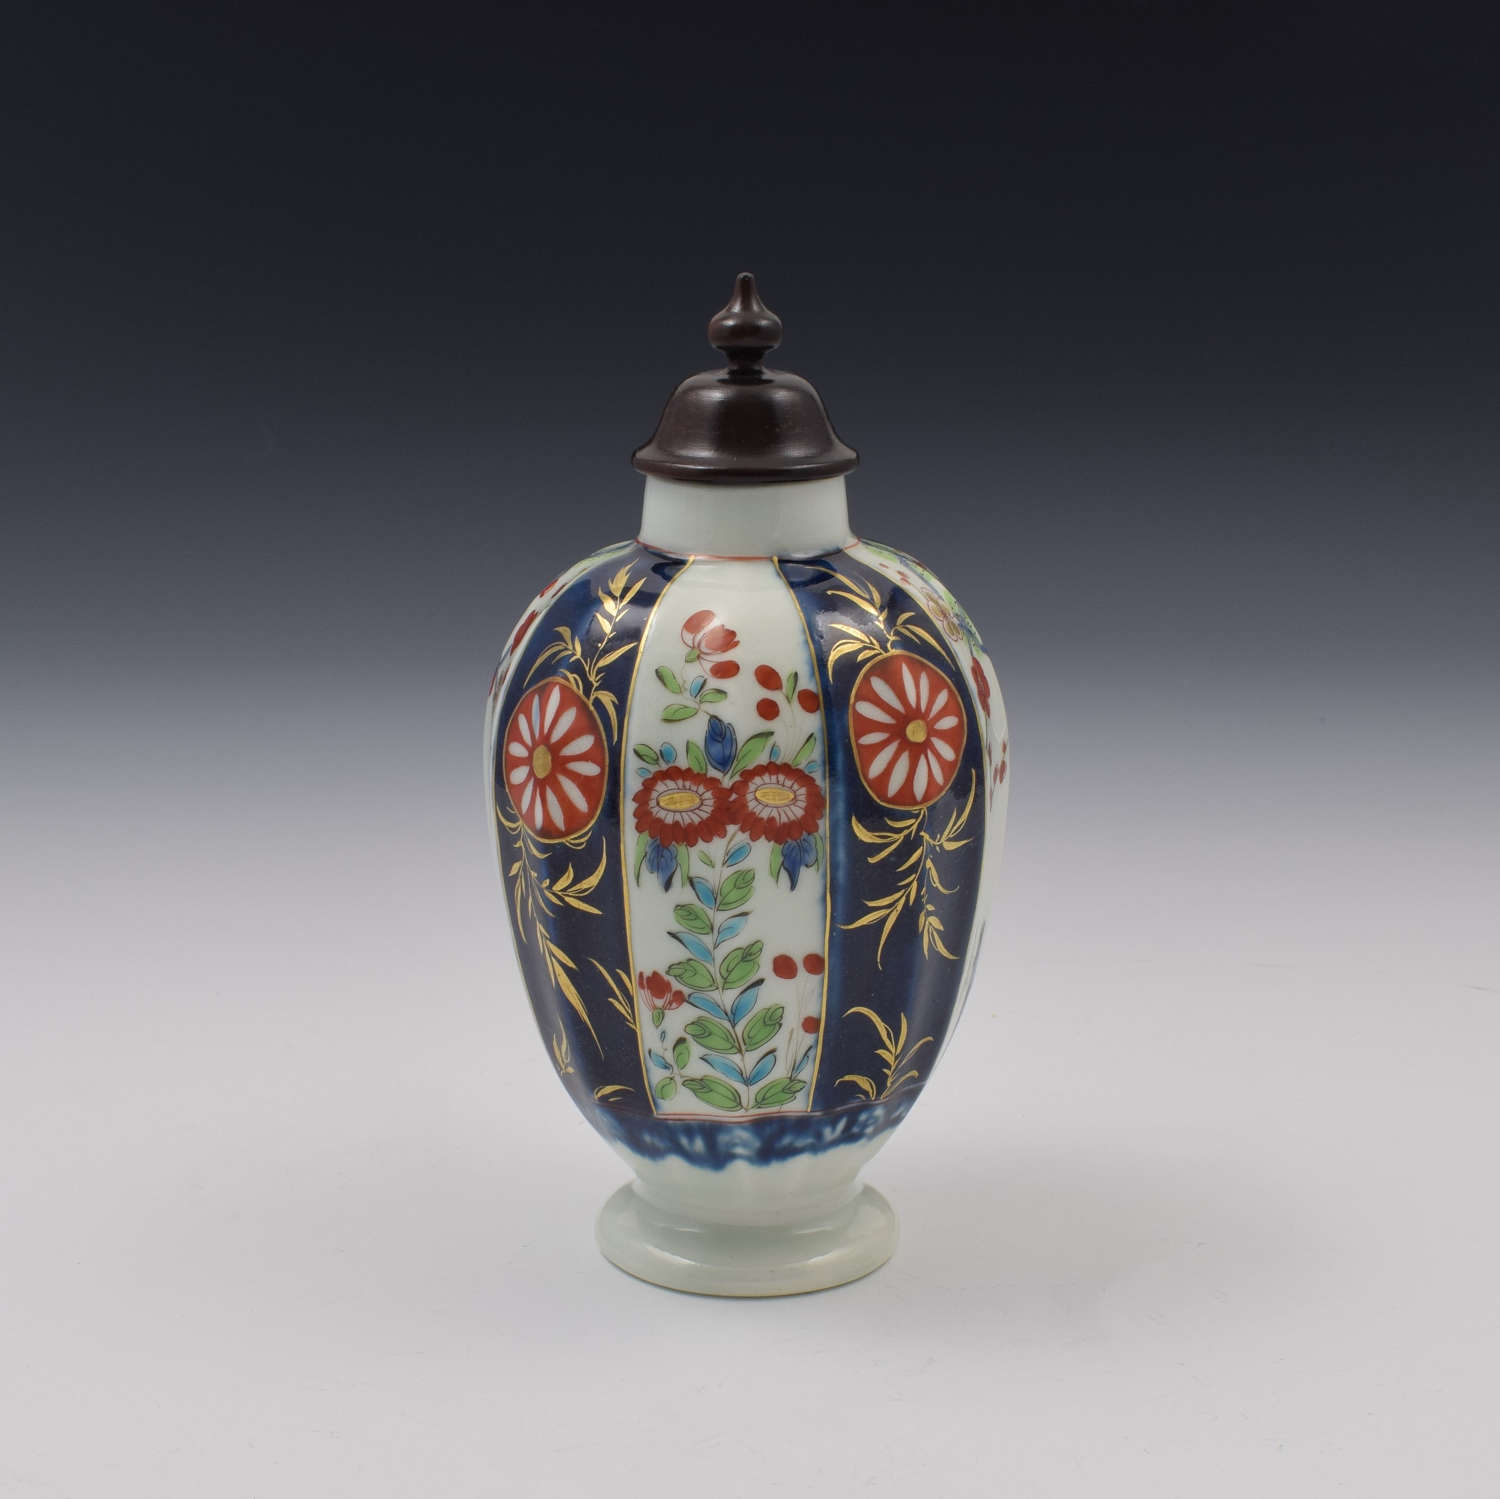 First Period Worcester Porcelain Kakiemon Tea Canister c.1770